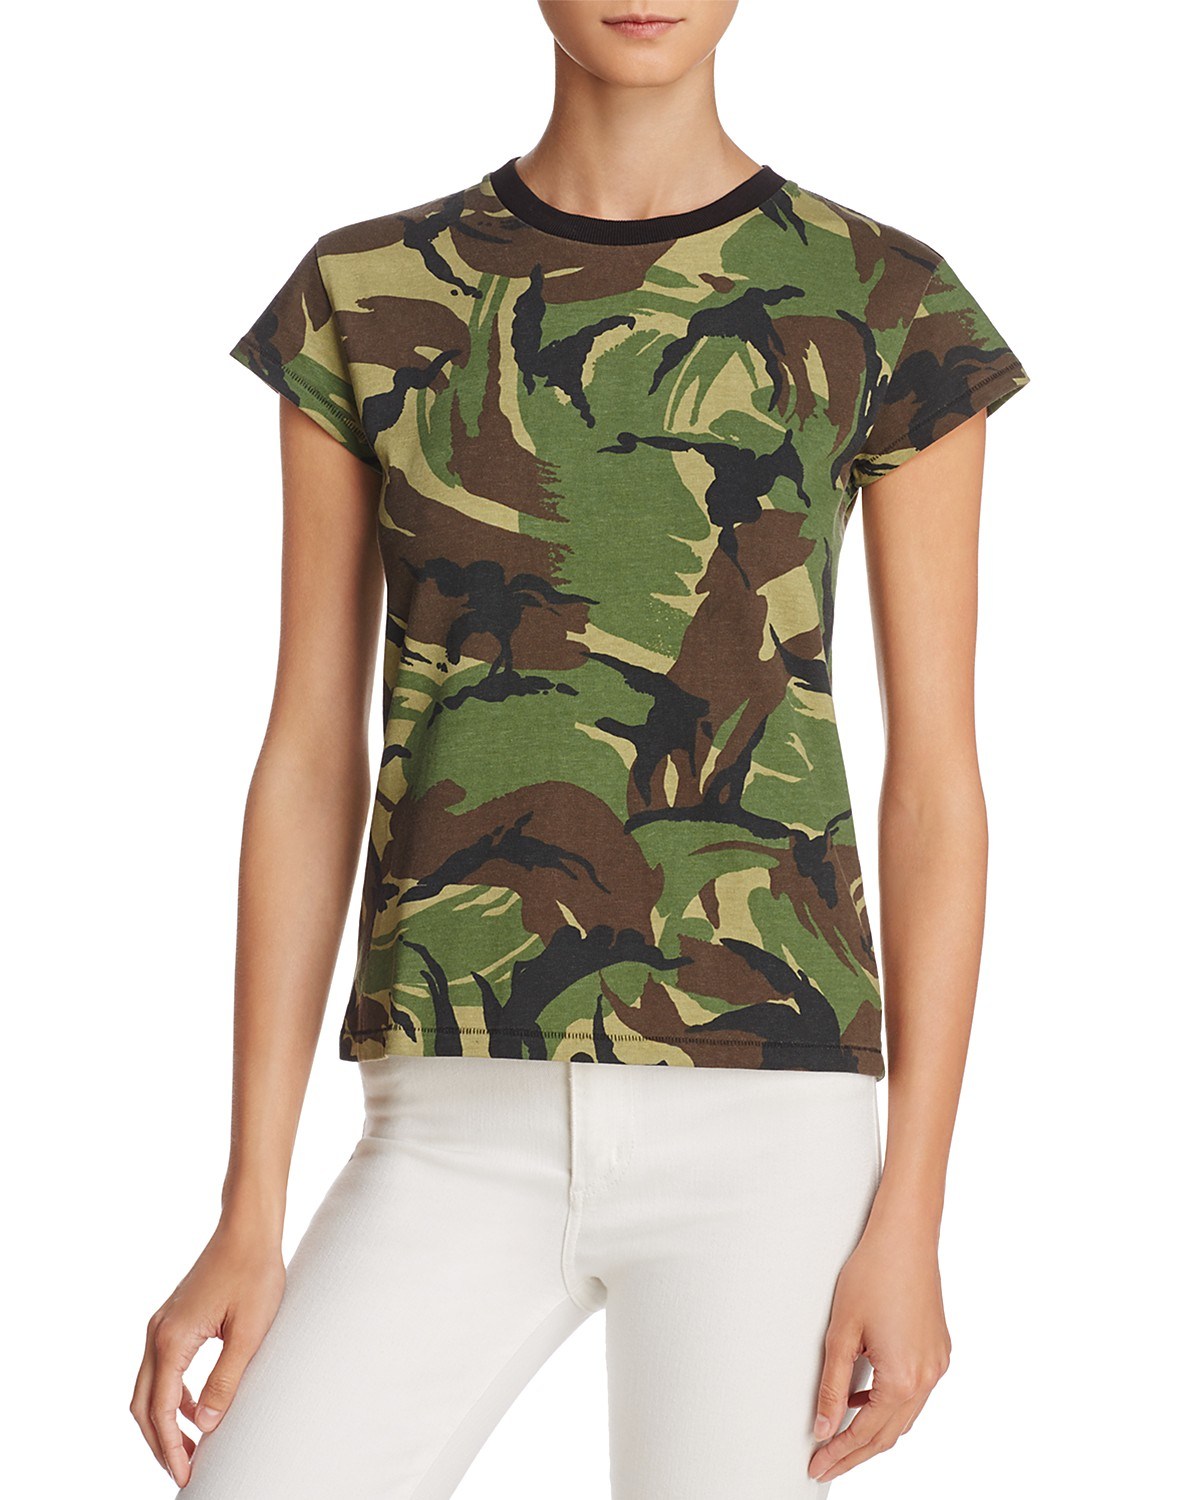 Newest Designs Round Neck Camo Customized Printing T Shirts